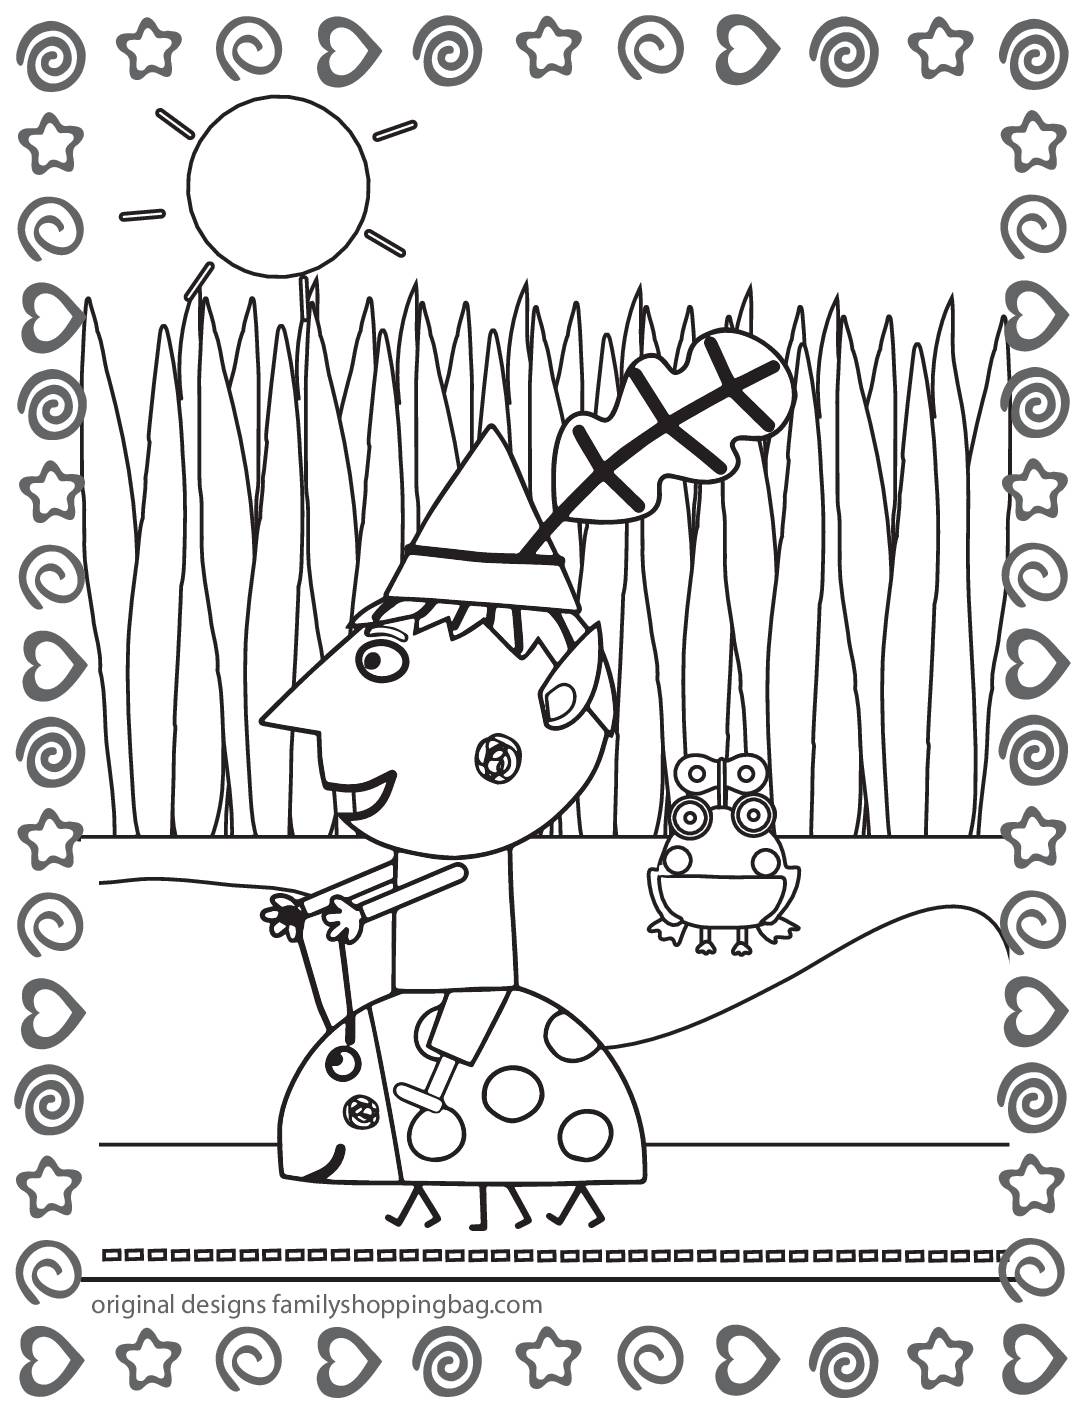 Coloring Page 6 Ben & Holly Coloring Pages